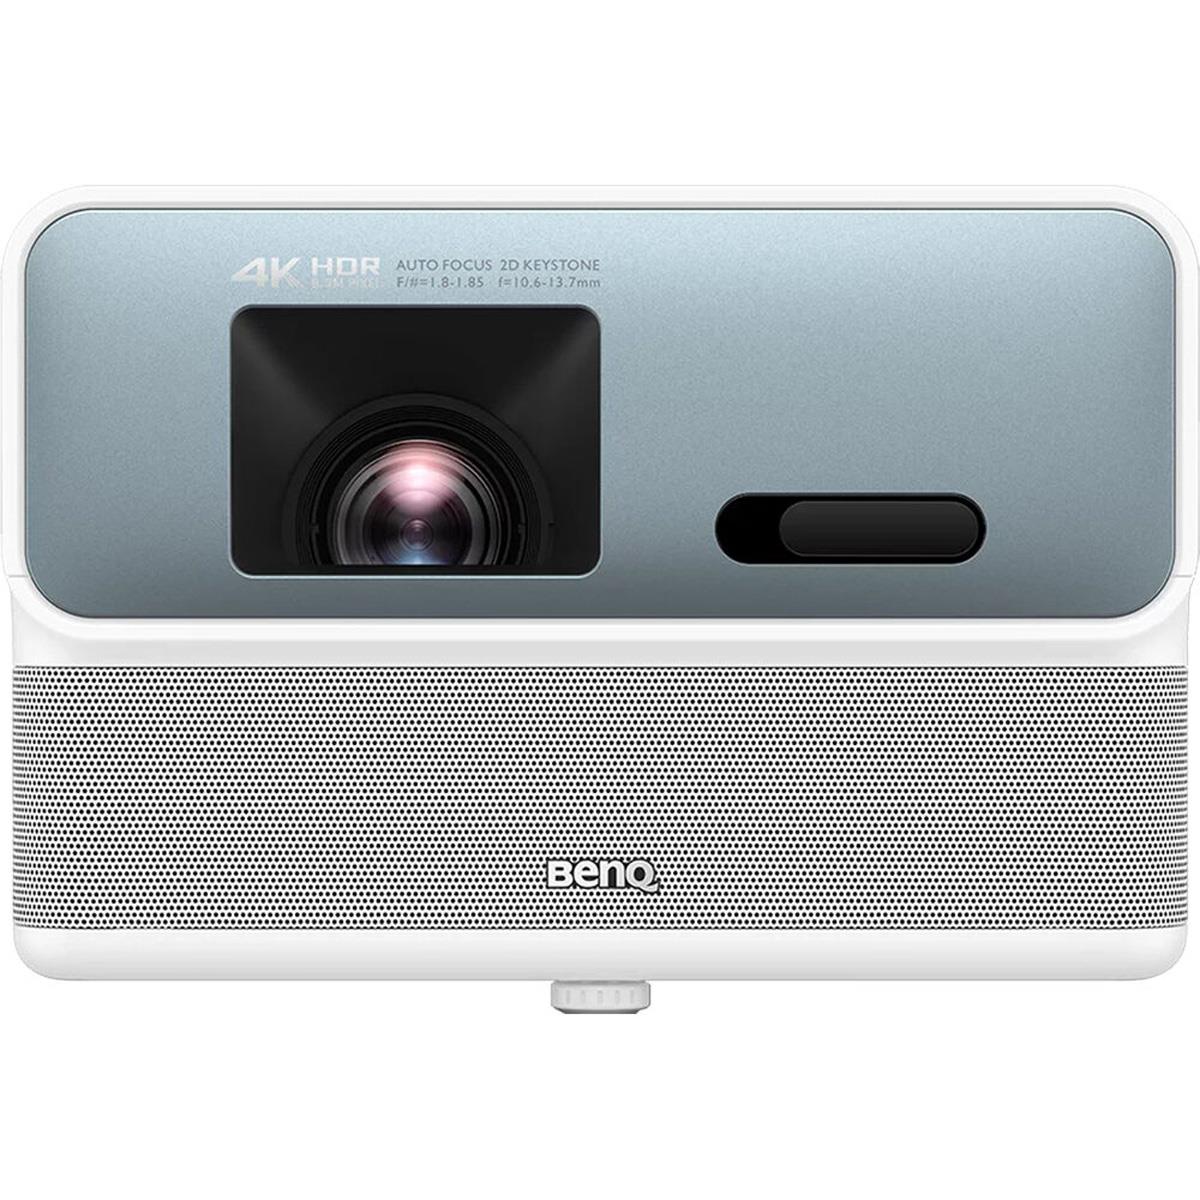 BenQ GP500 4K HDR LED Smart Home Theater Projector $799 + free s/h